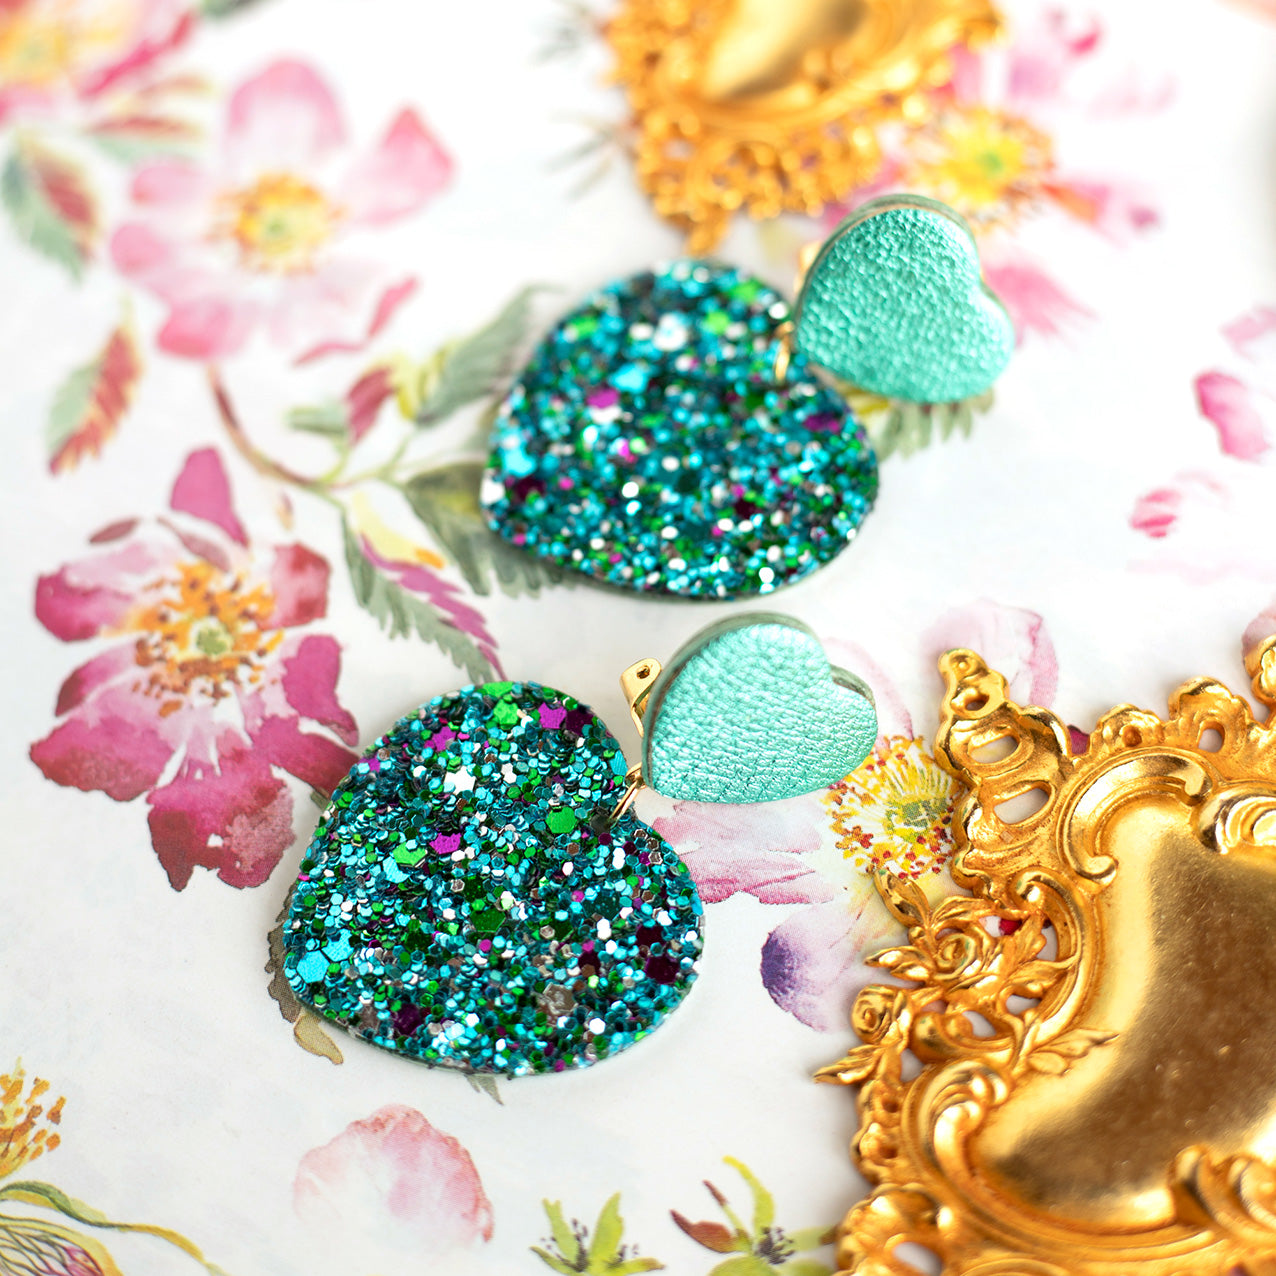 Copy of Double Hearts clip-on earrings - metallic turquoise leather and glitter